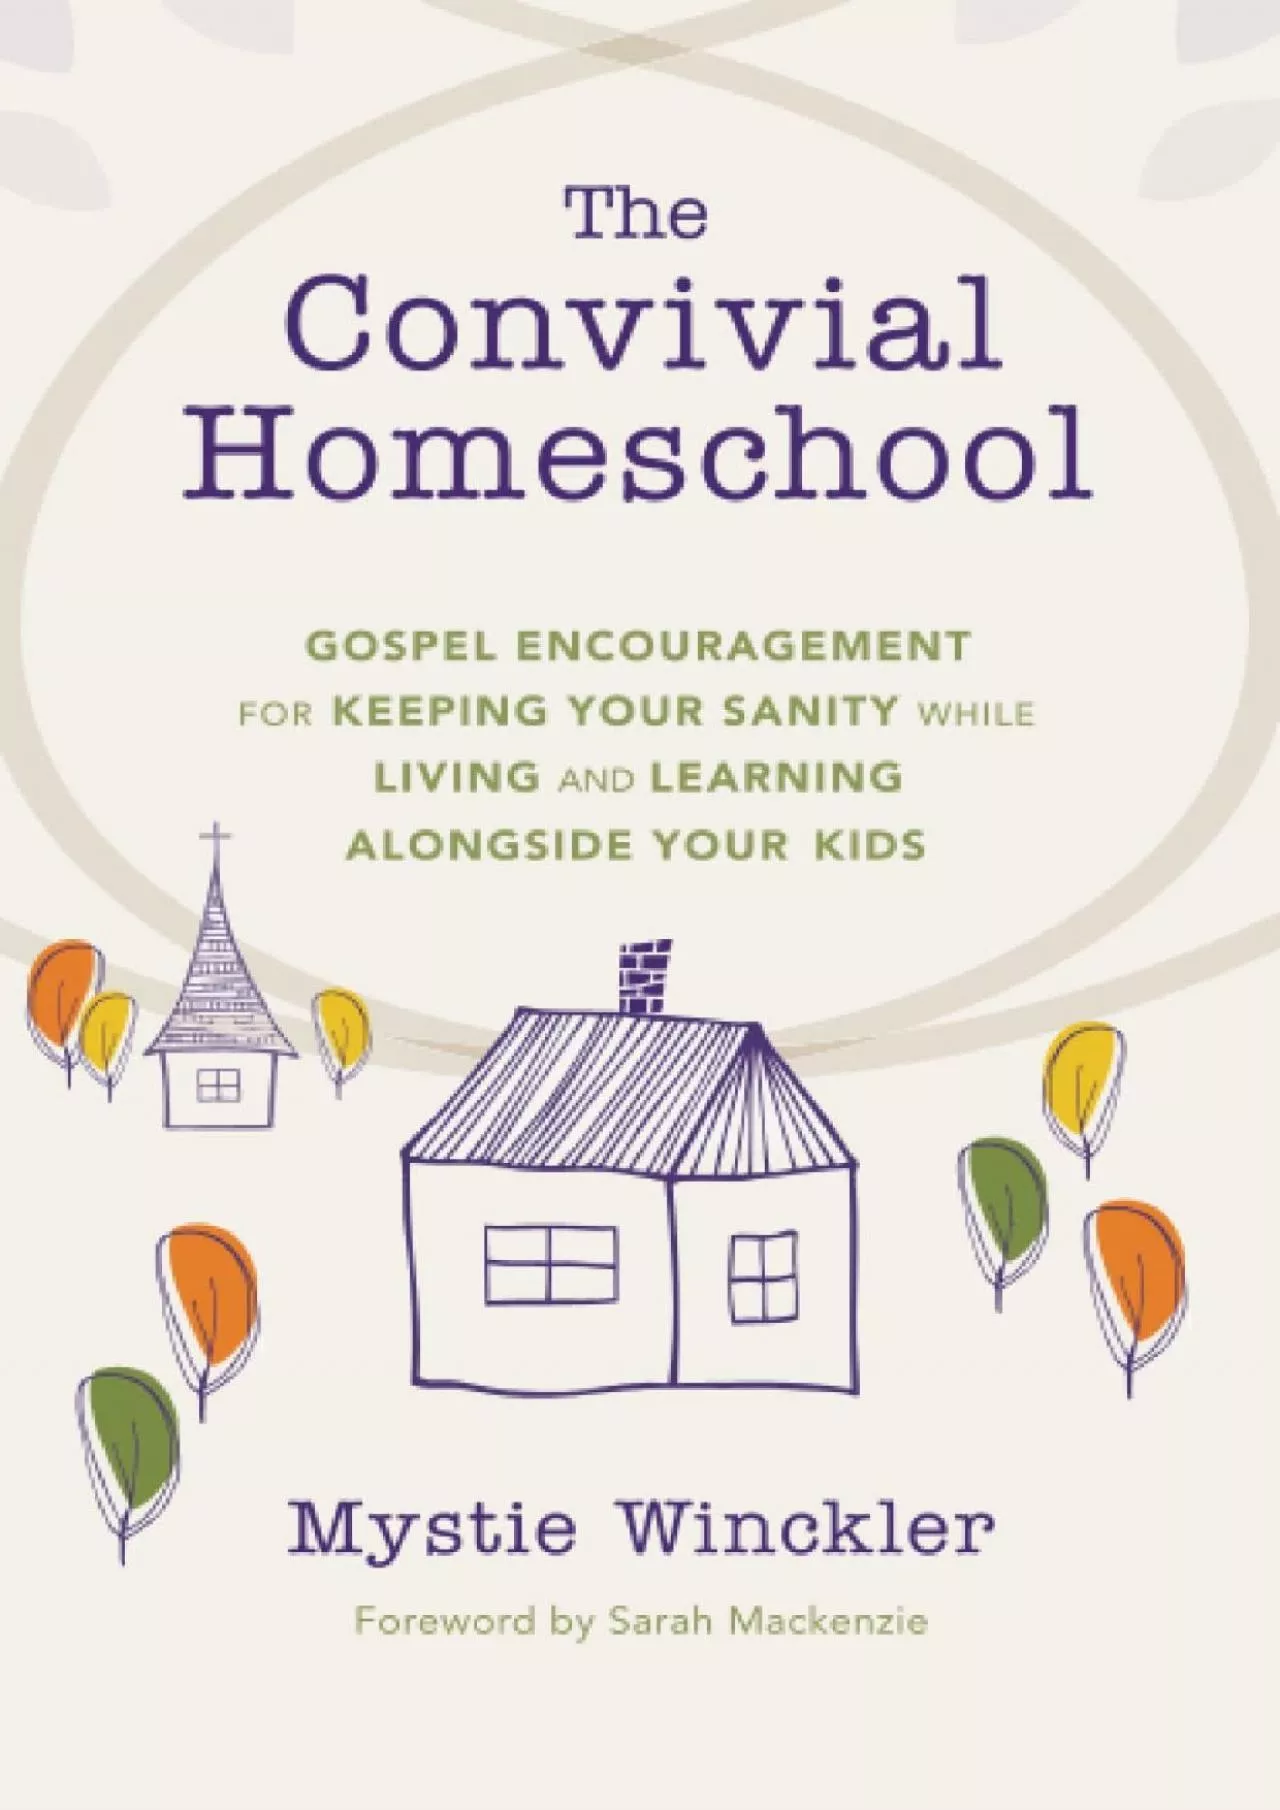 [EBOOK] The Convivial Homeschool: Gospel Encouragement for Keeping Your Sanity While Living